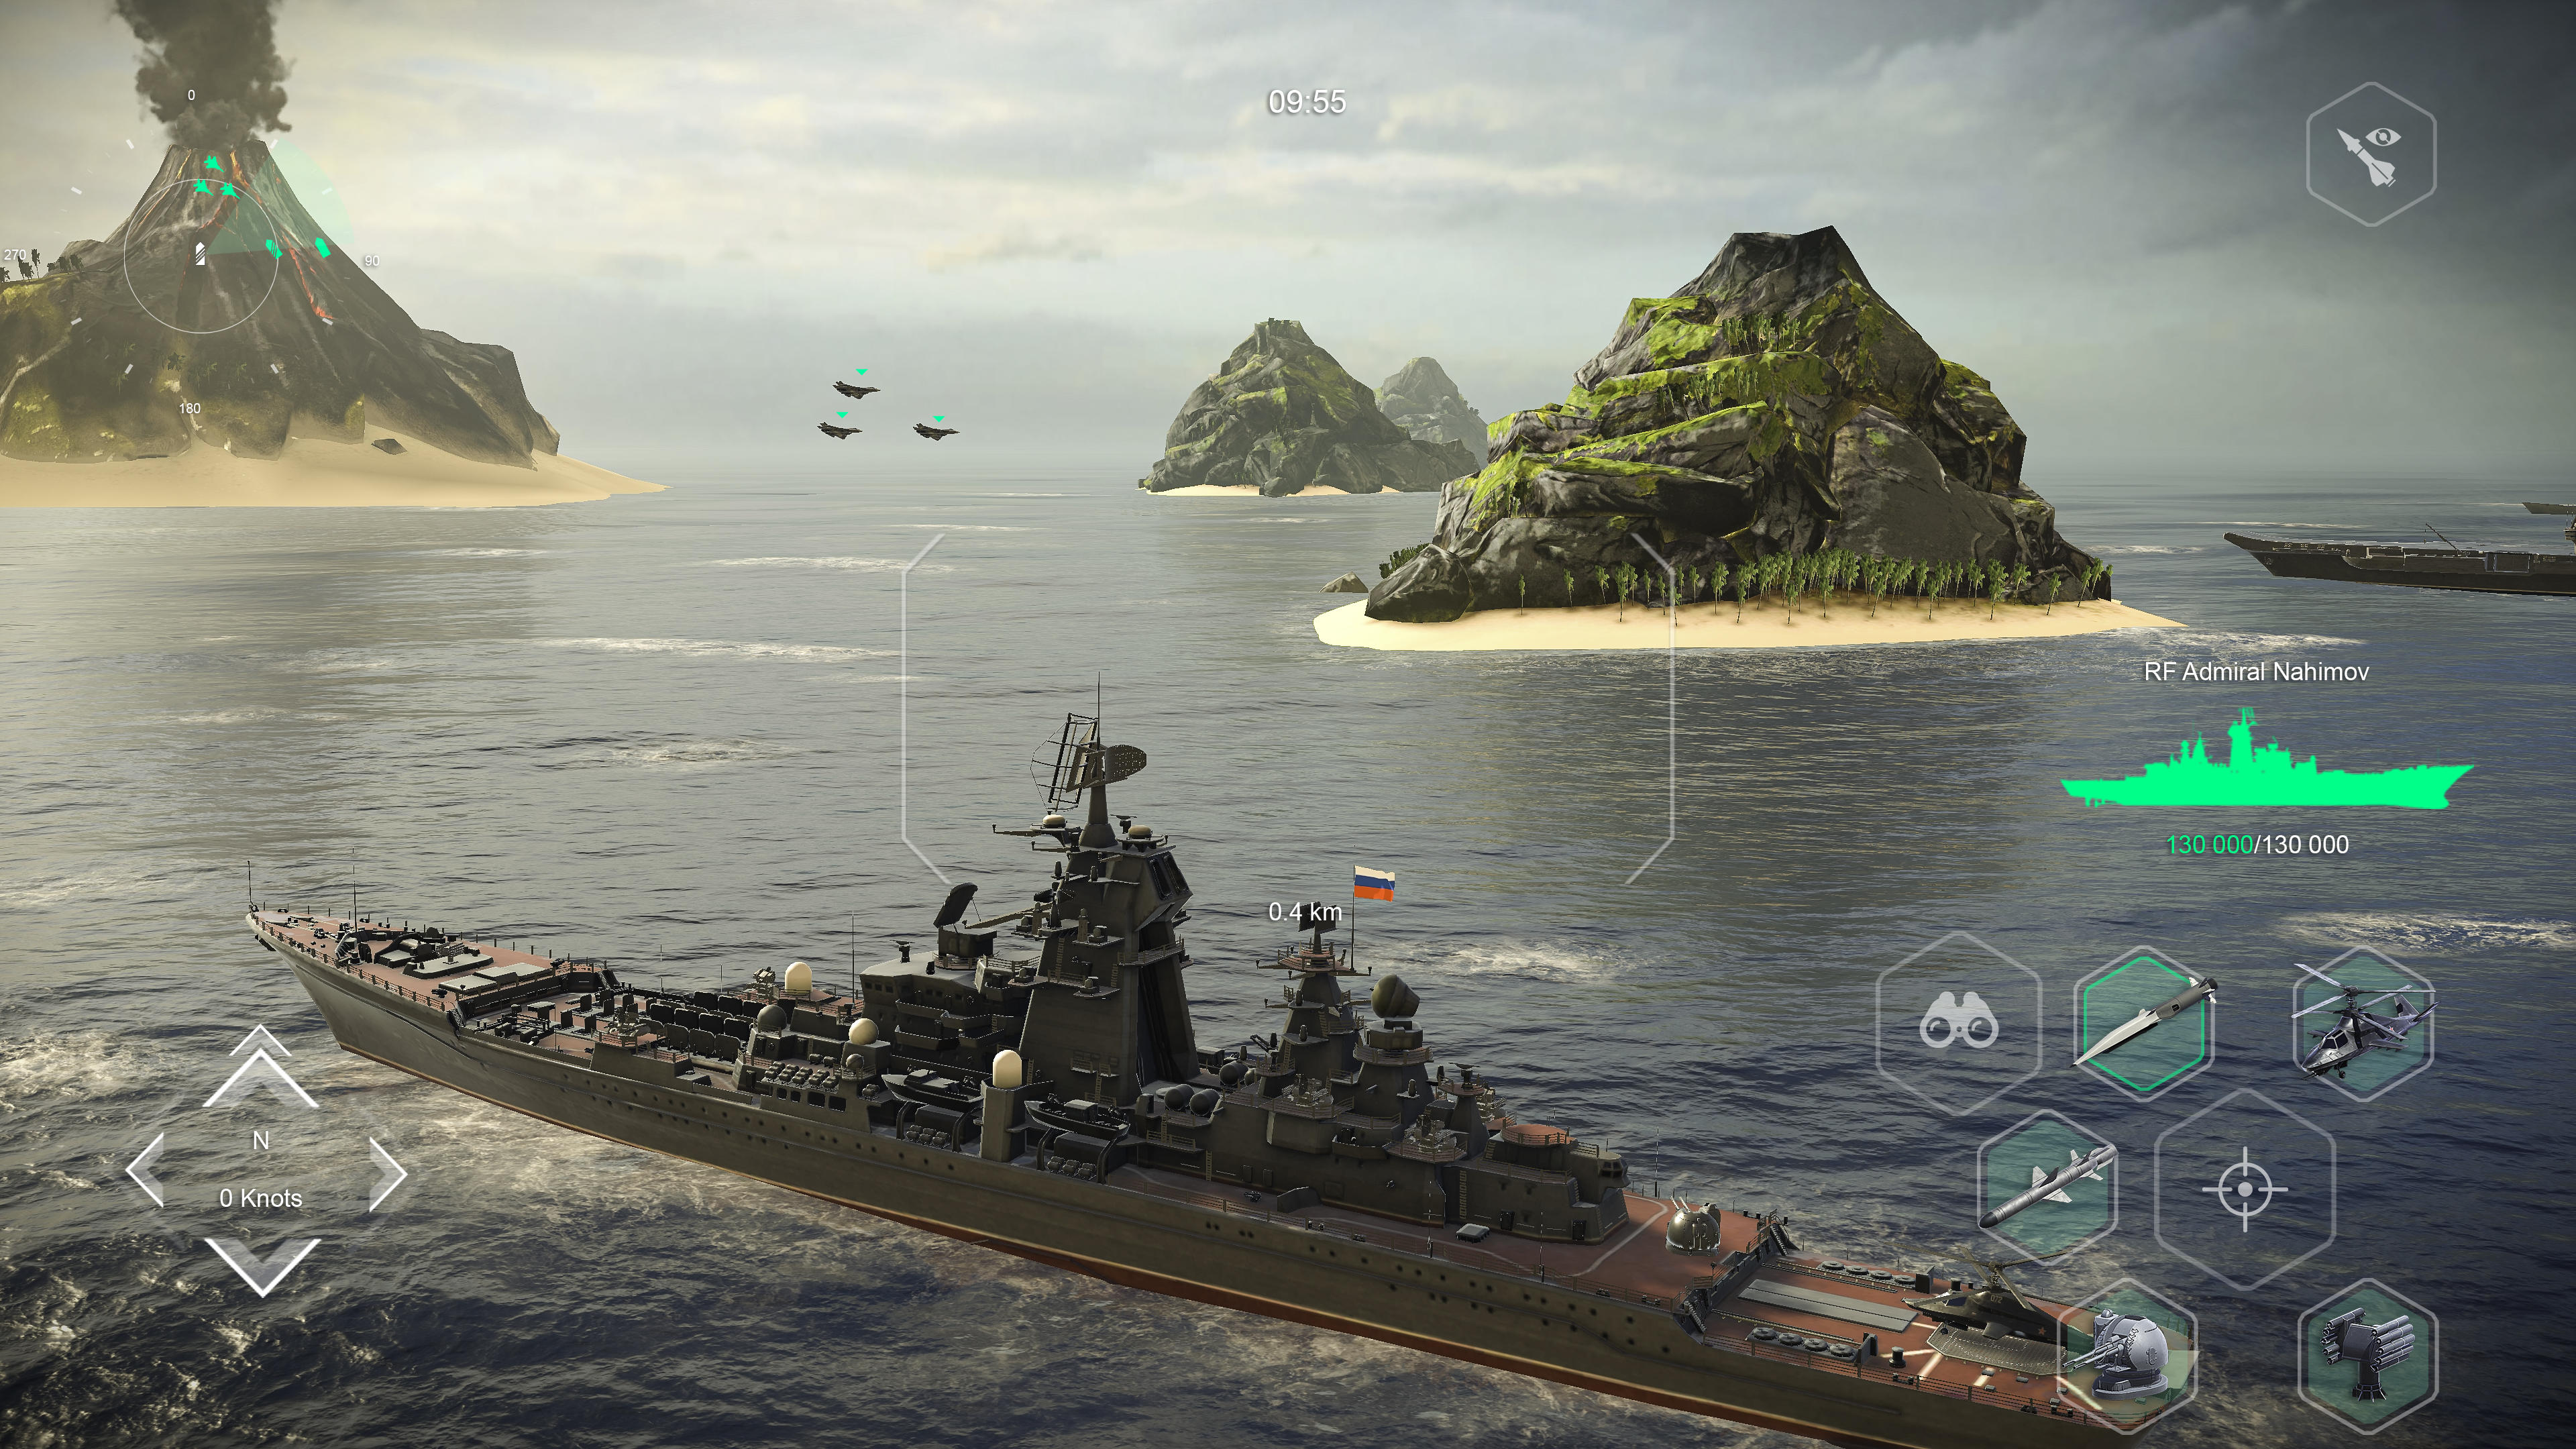 Pacific Warships download the new for ios